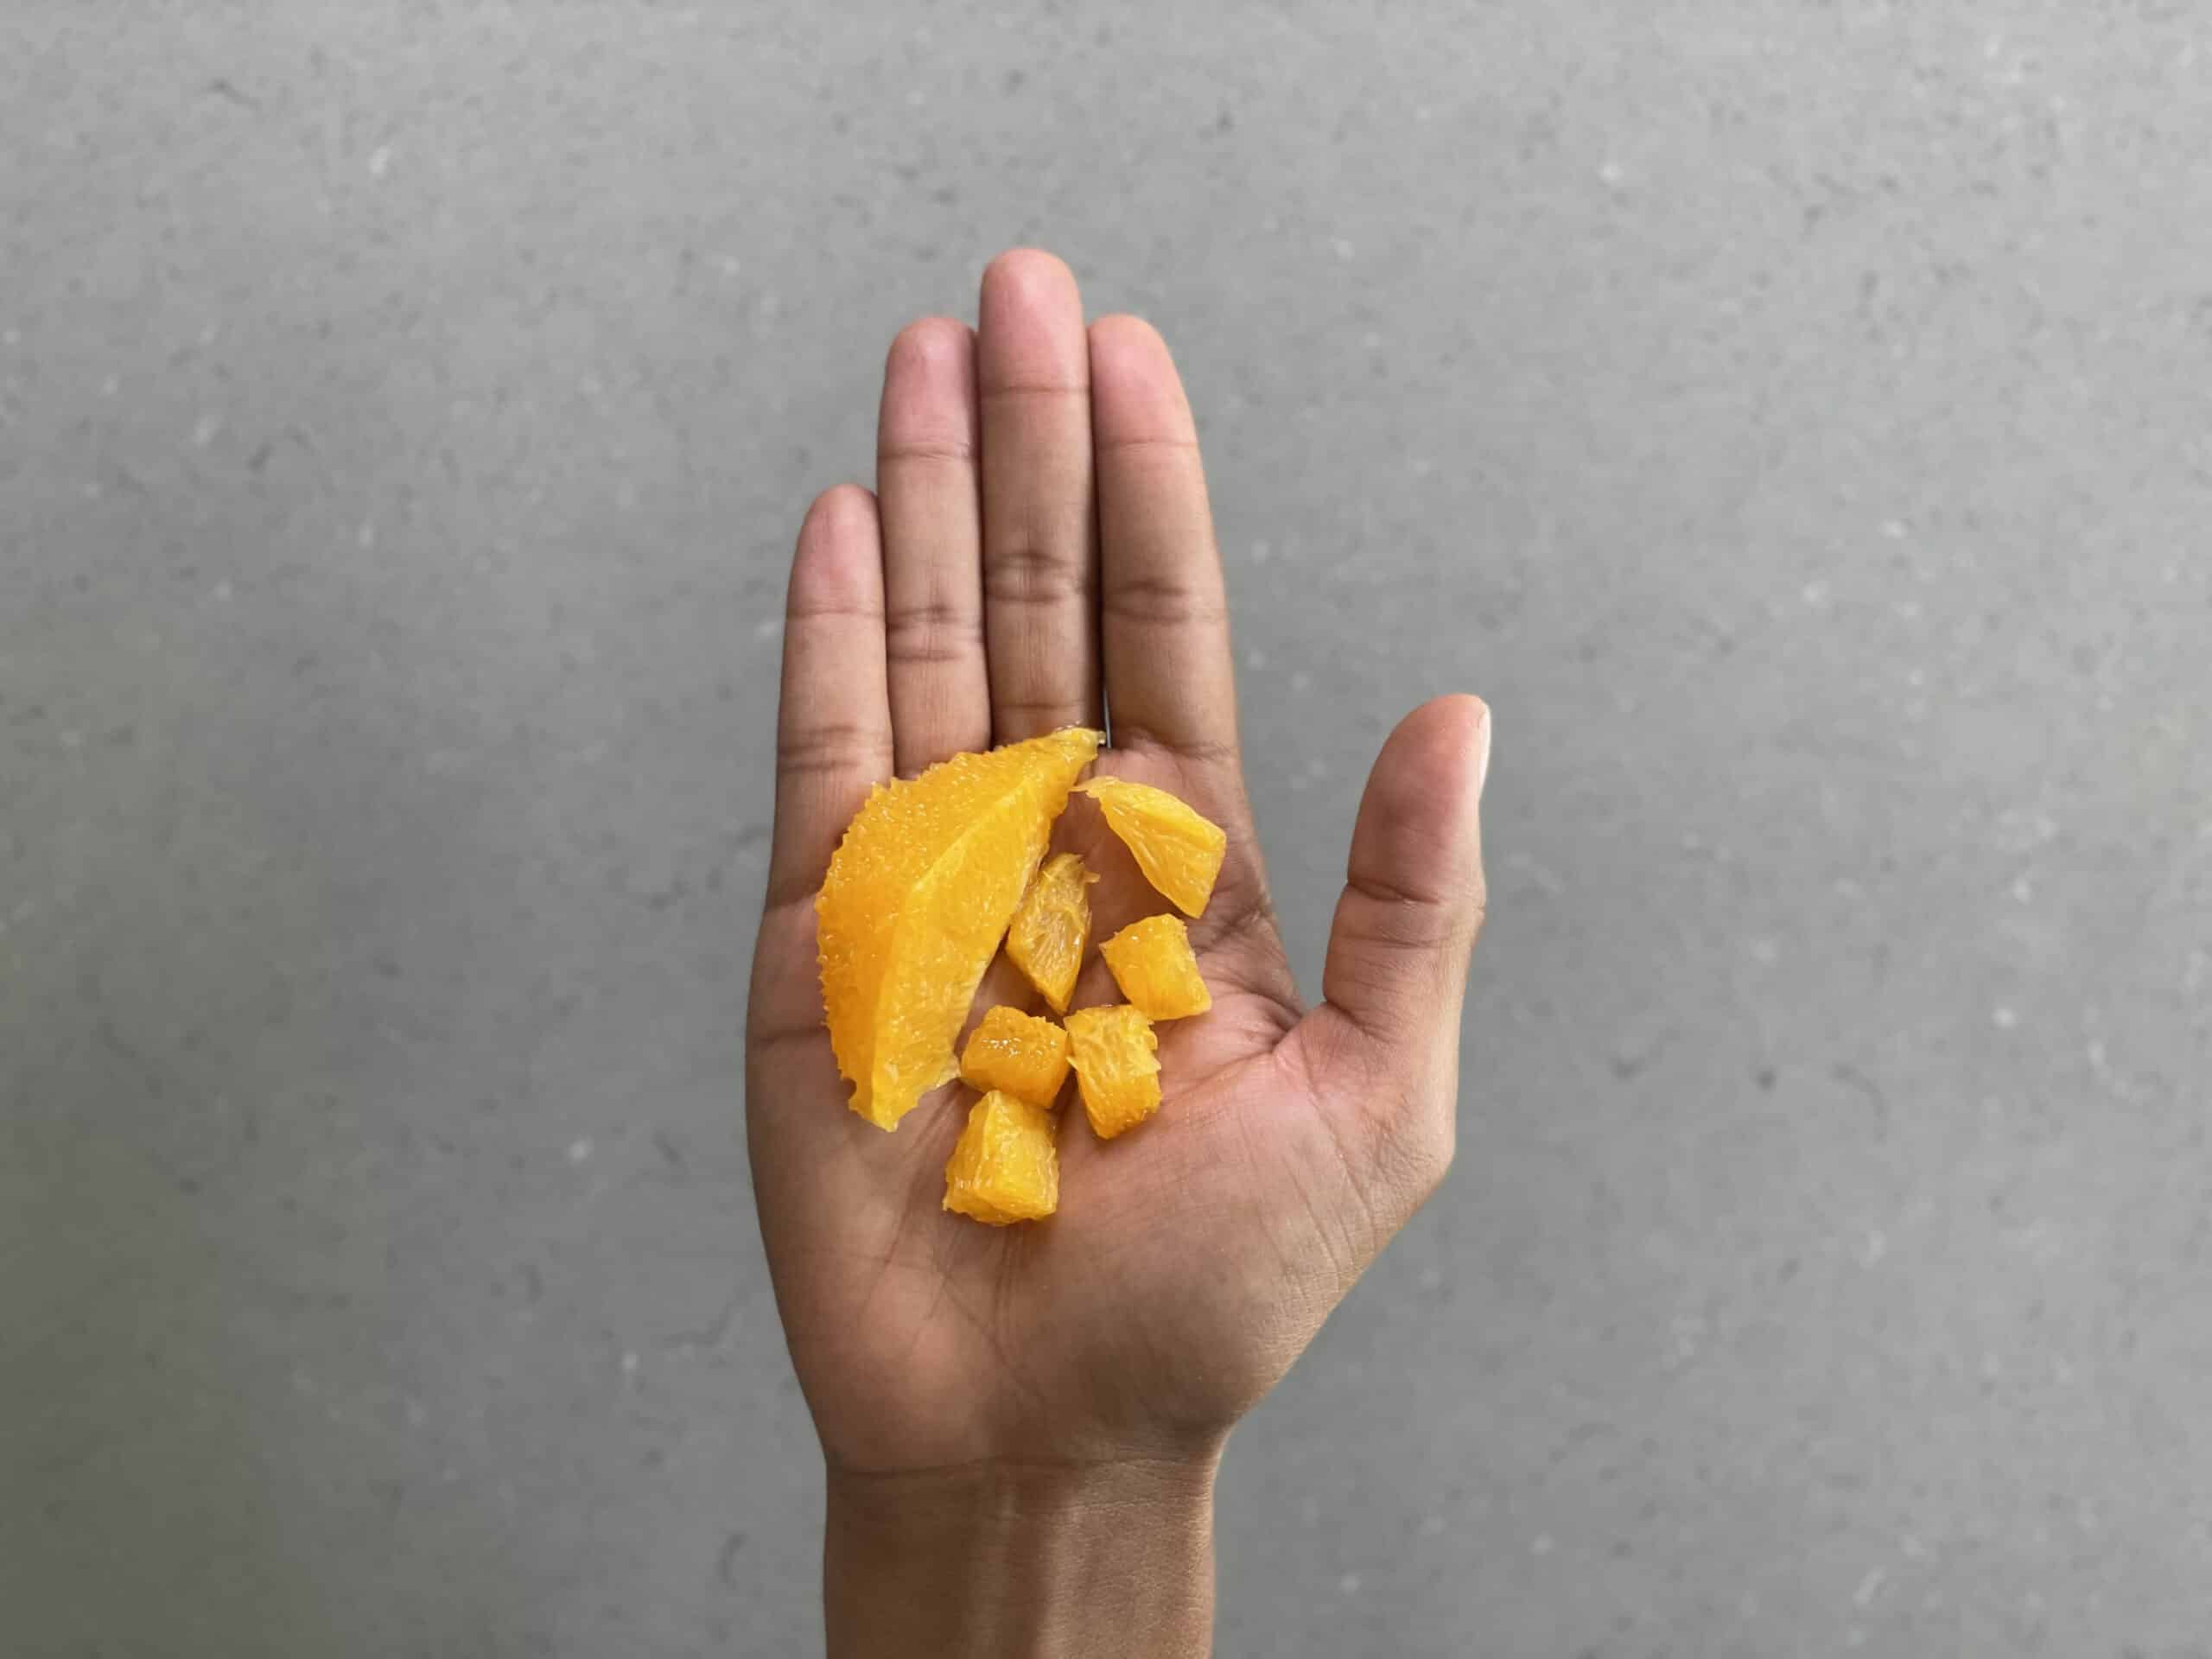 a hand holding one supremed orange wedge and small bite-sized pieces with the membrane removed